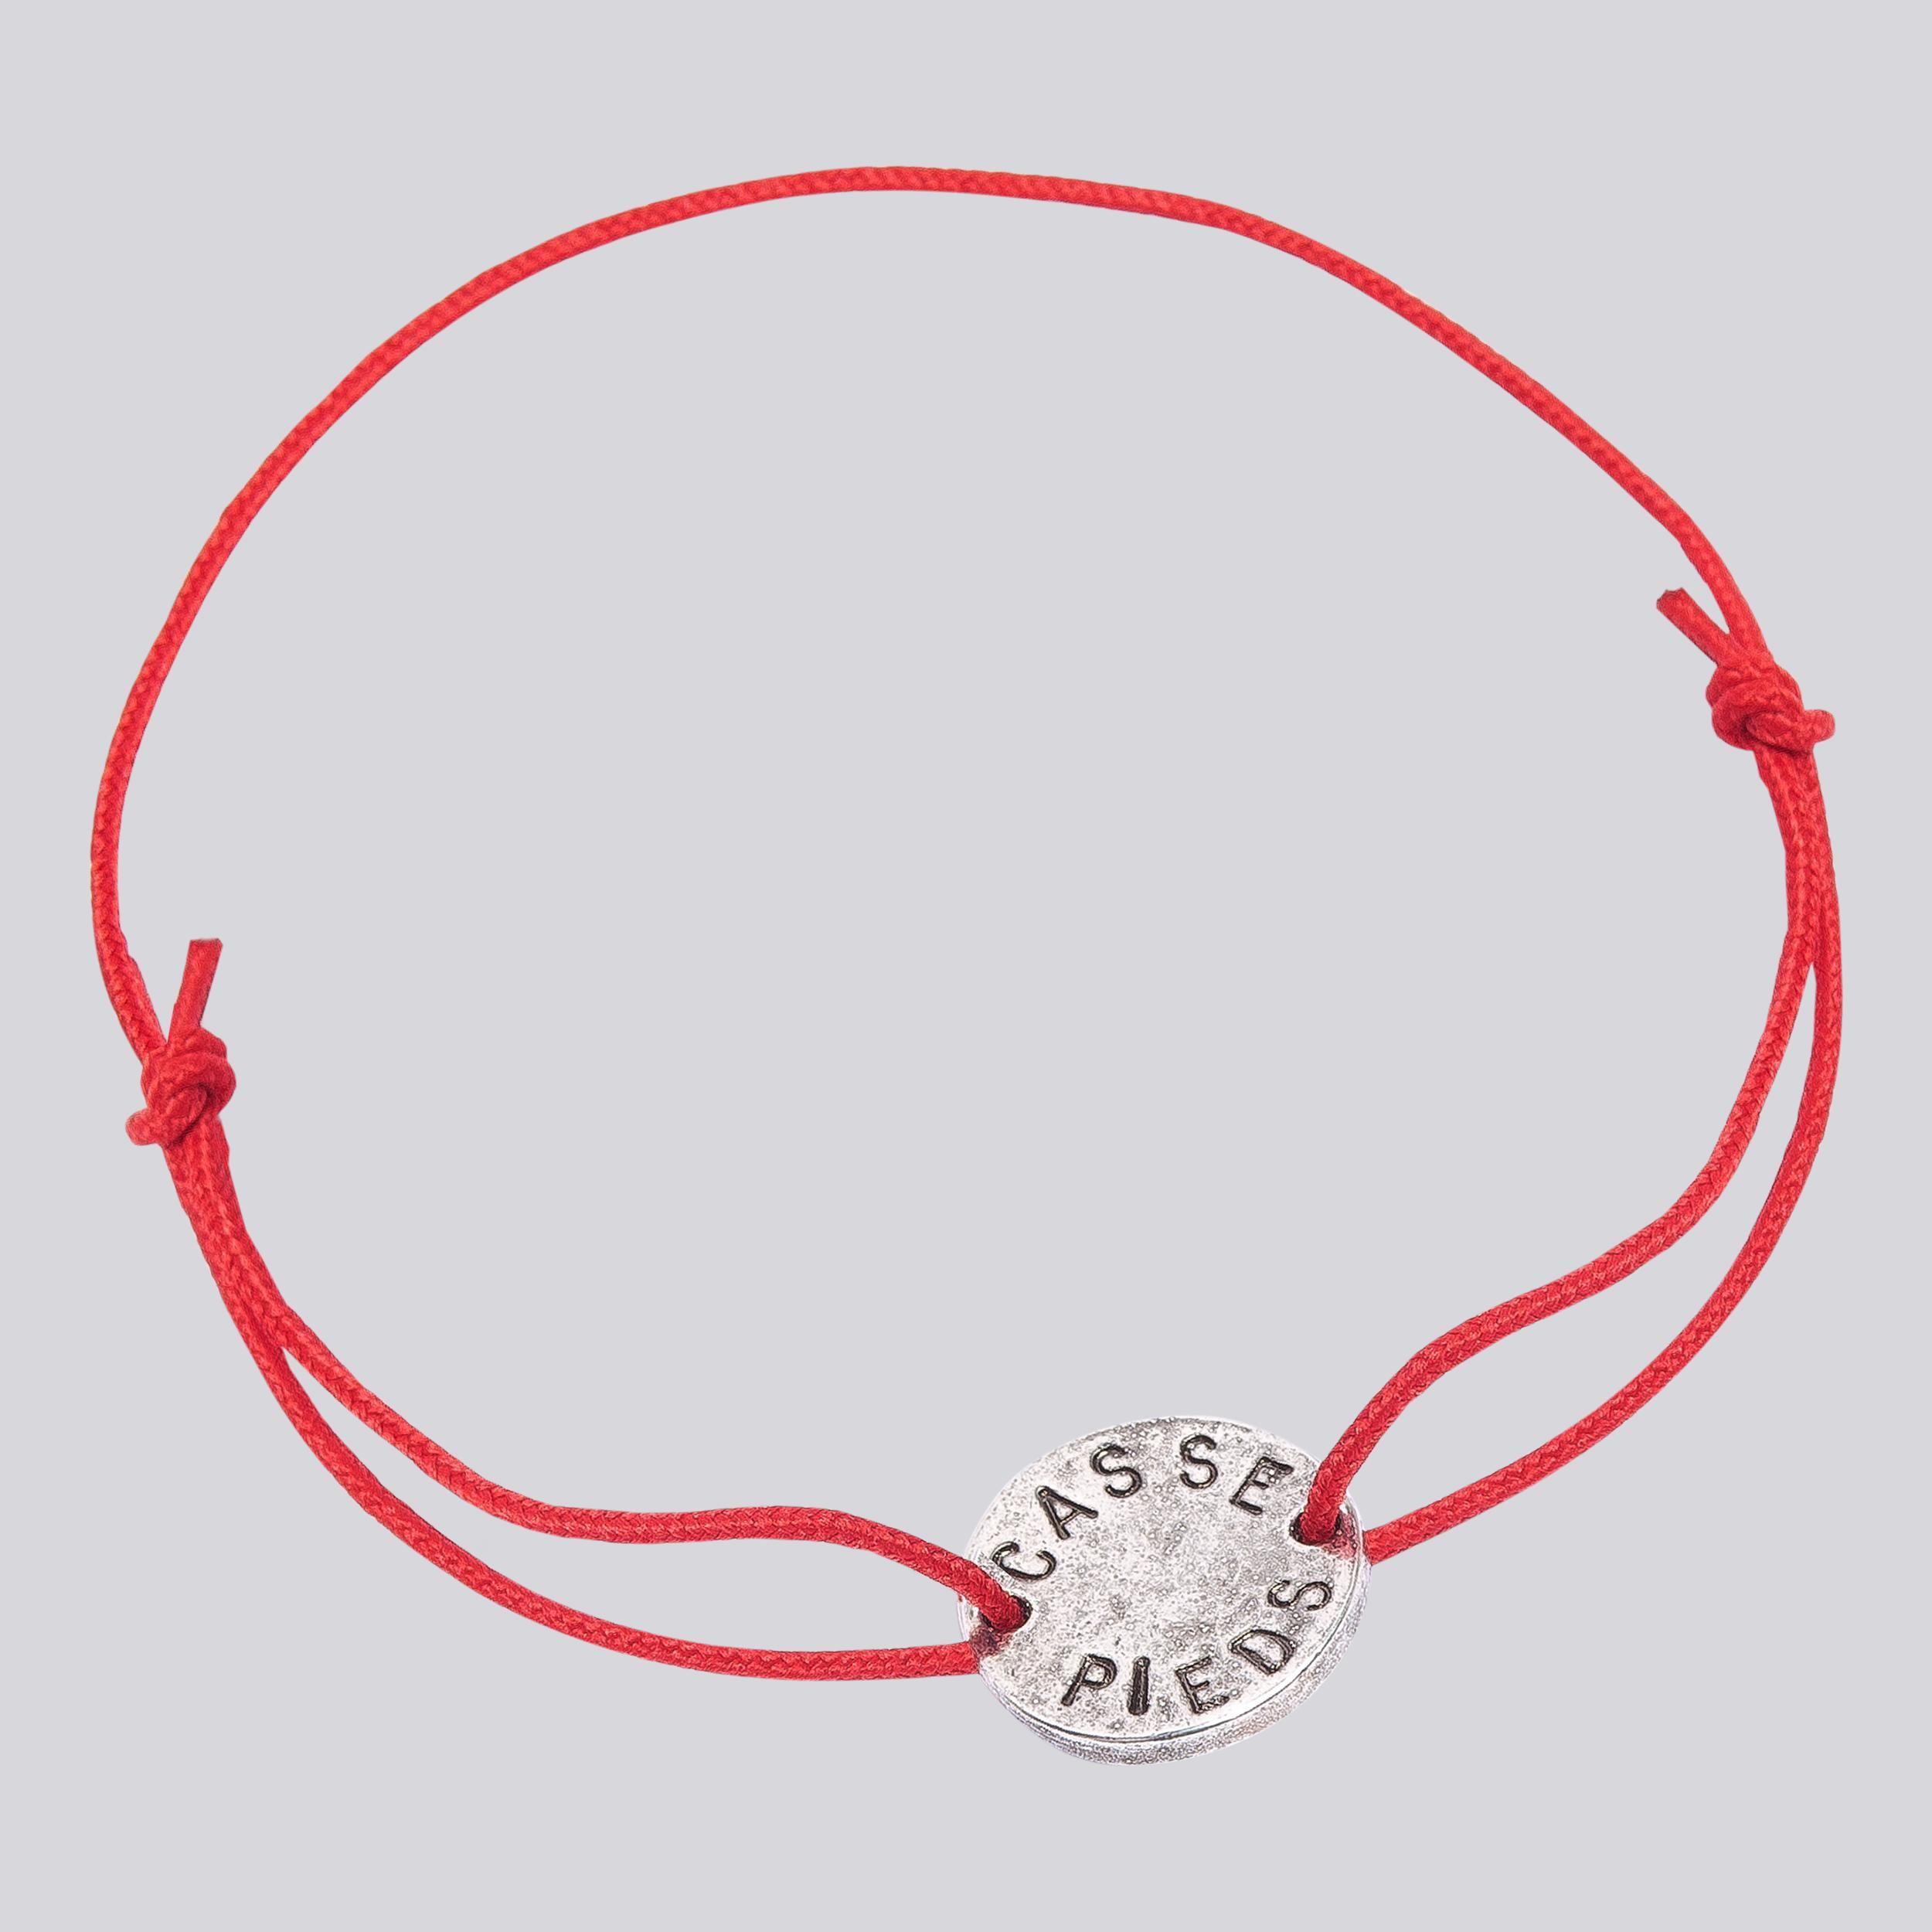 B in Red Circle Logo - Agnes B. Red Casse Pieds Bracelet in Red - Lyst